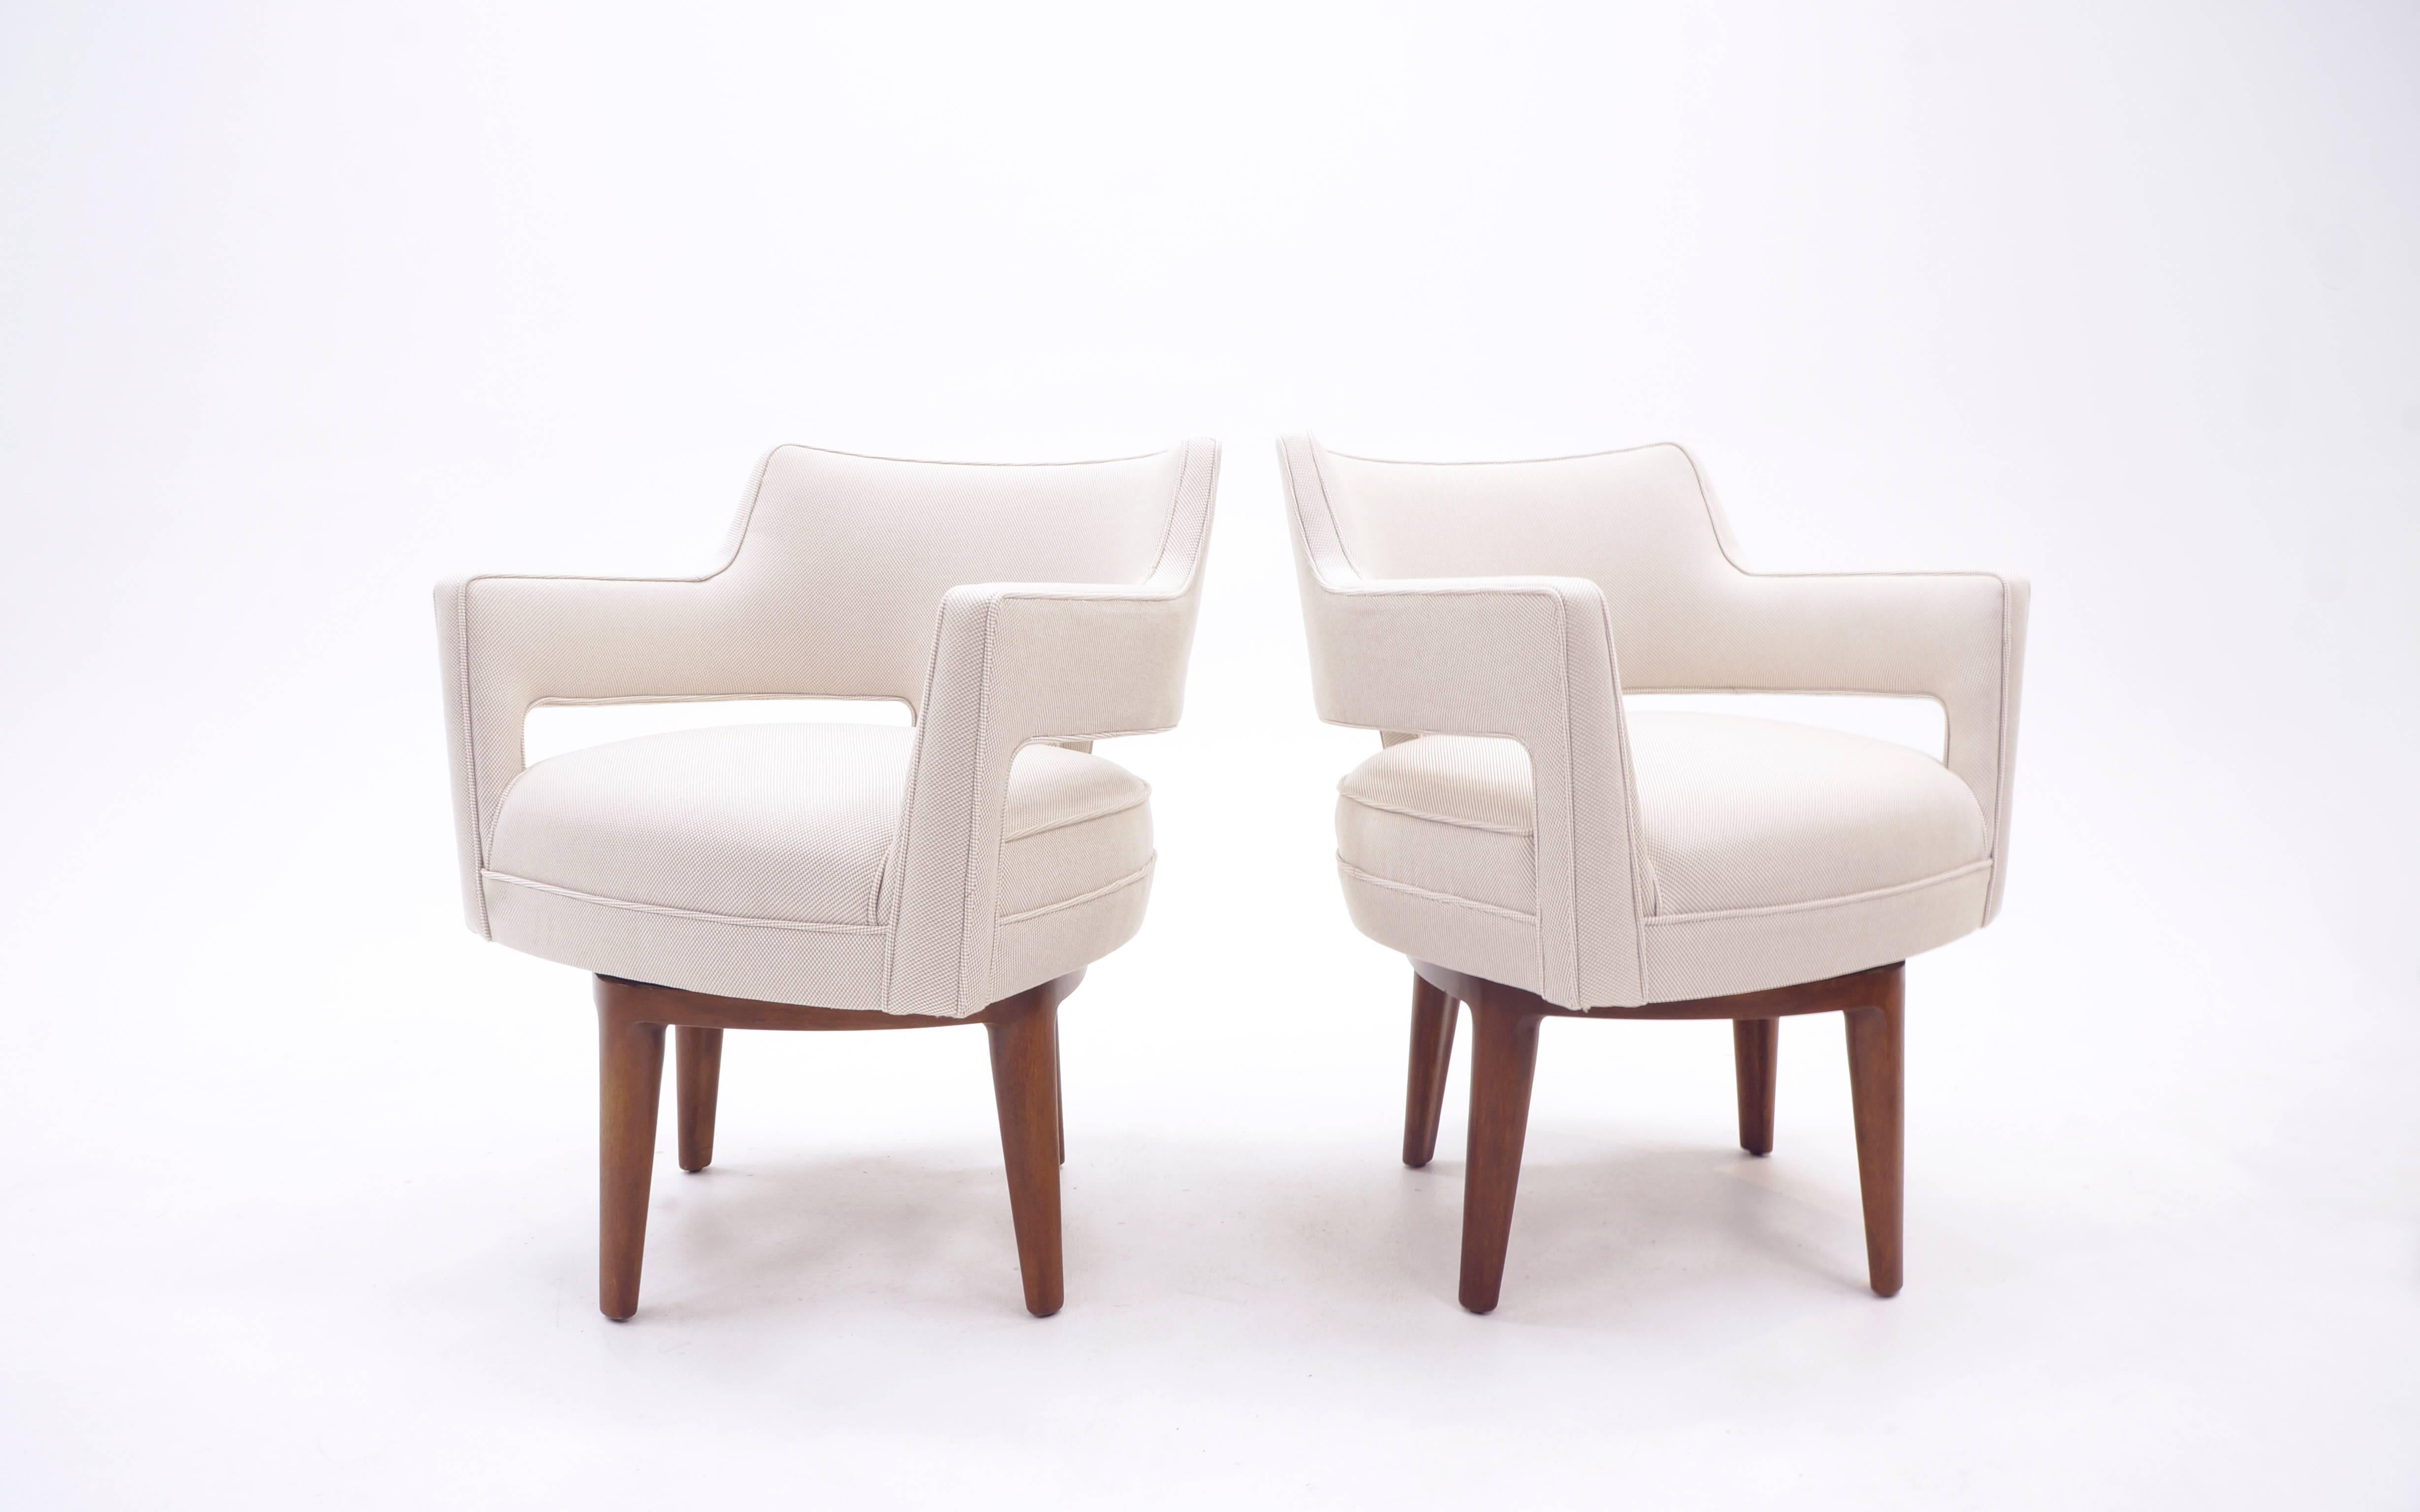 Set of four swivel armchairs designed by Edward Wormley for Dunbar. Dining / kitchen height chairs.  Very comfortable, substantial scale. Look at the detail in this design, both the upholstery and the mahogany legs and base. The subtle angles and